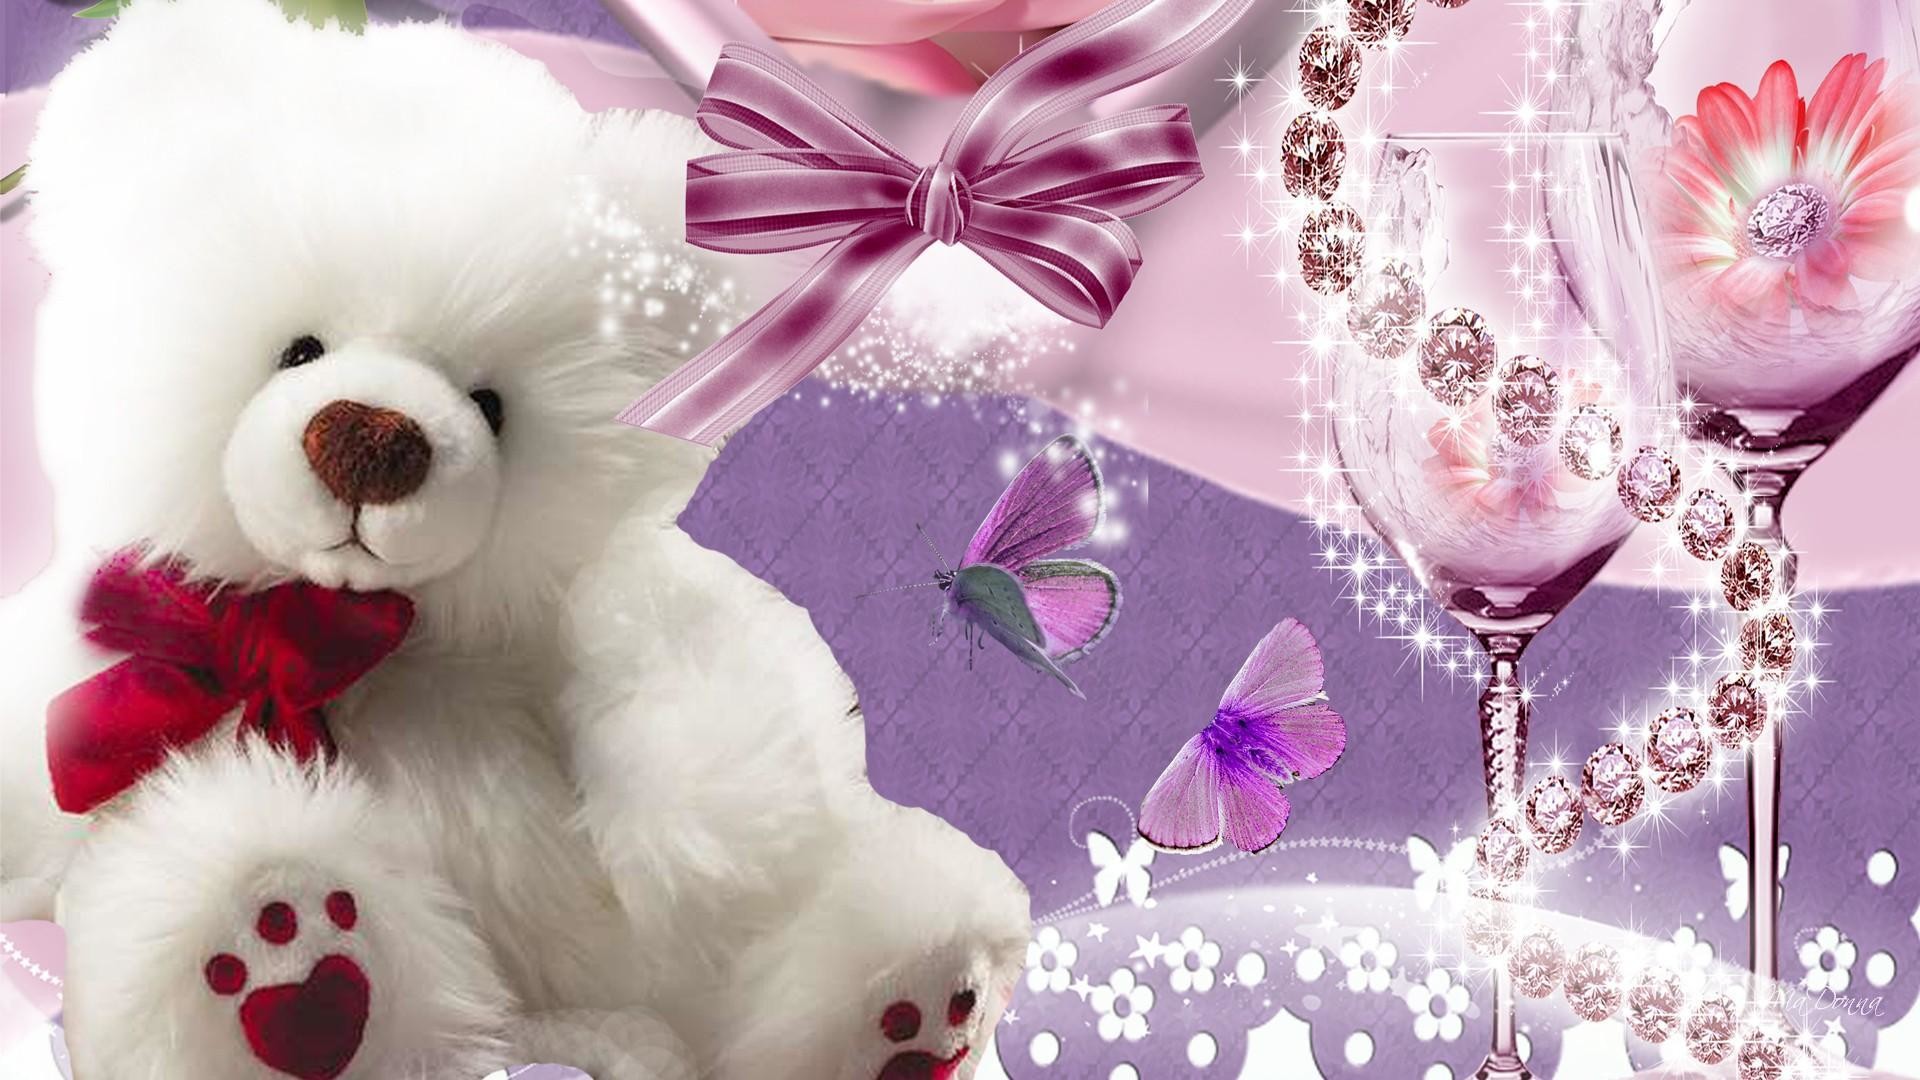 nice wallpapers for whatsapp,pink,teddy bear,stuffed toy,valentine's day,heart